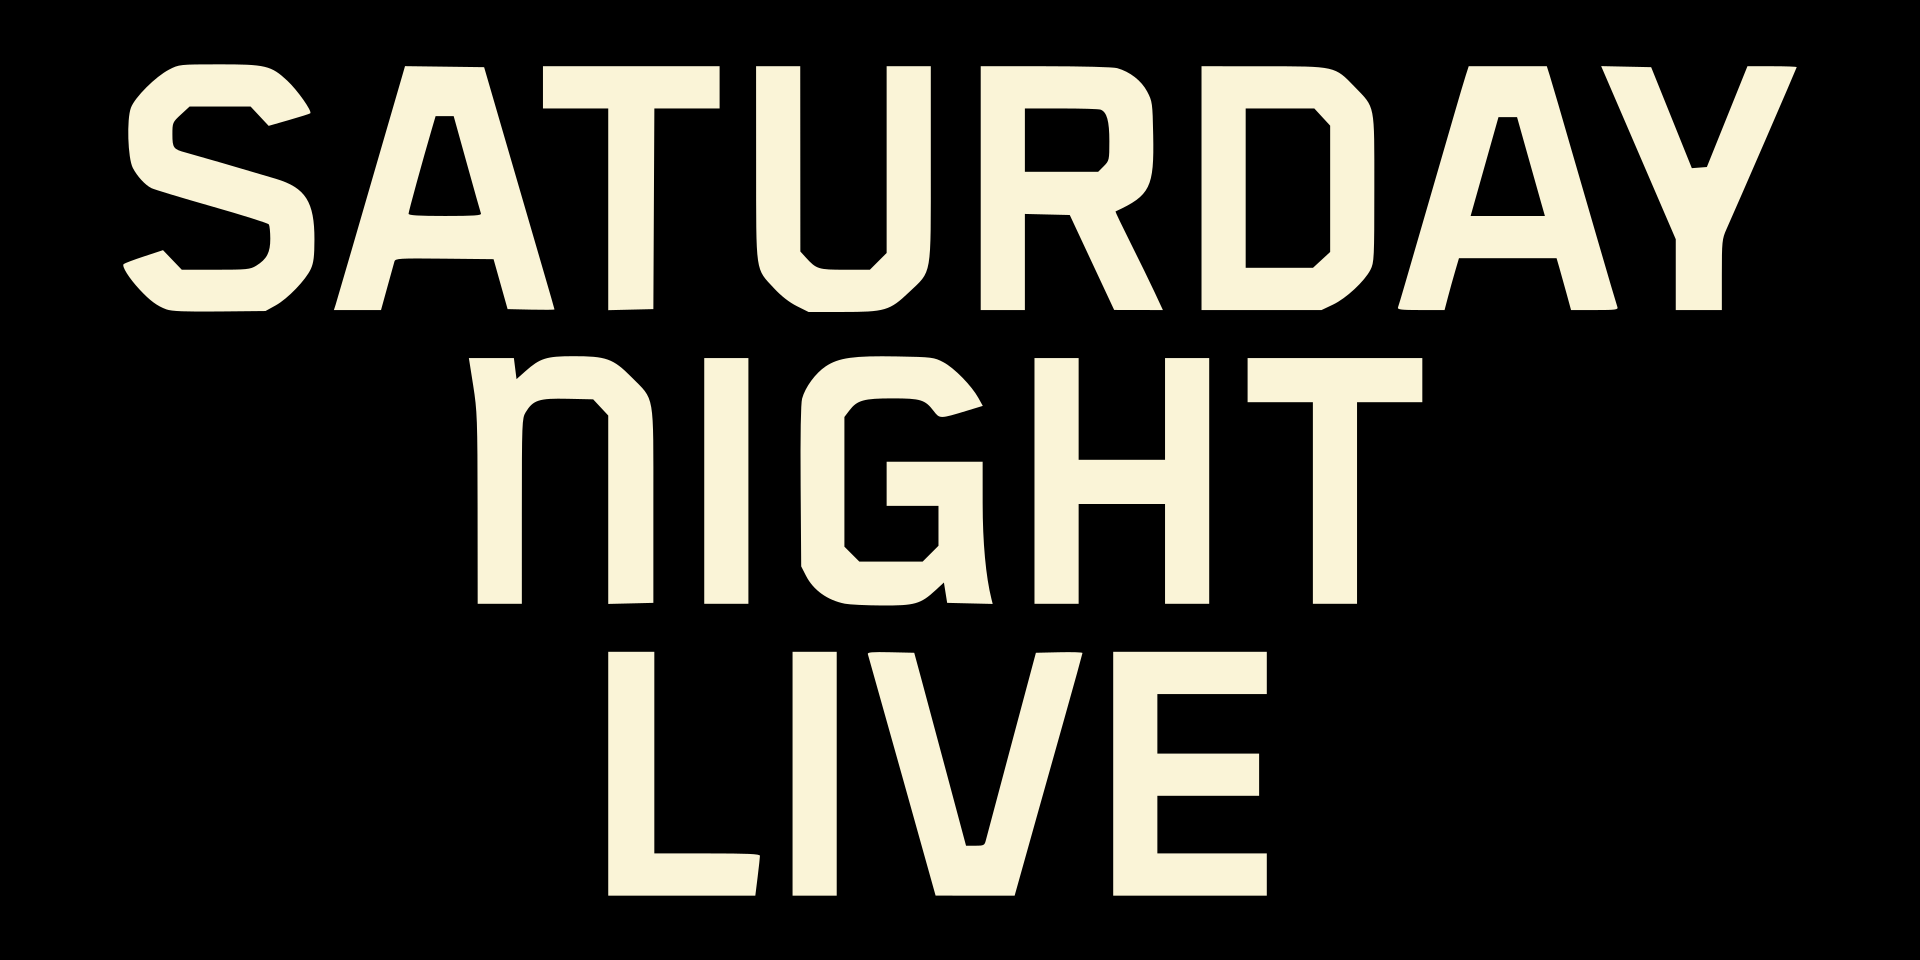 Saturday Night Live Has Been a Pop Culture Mainstay